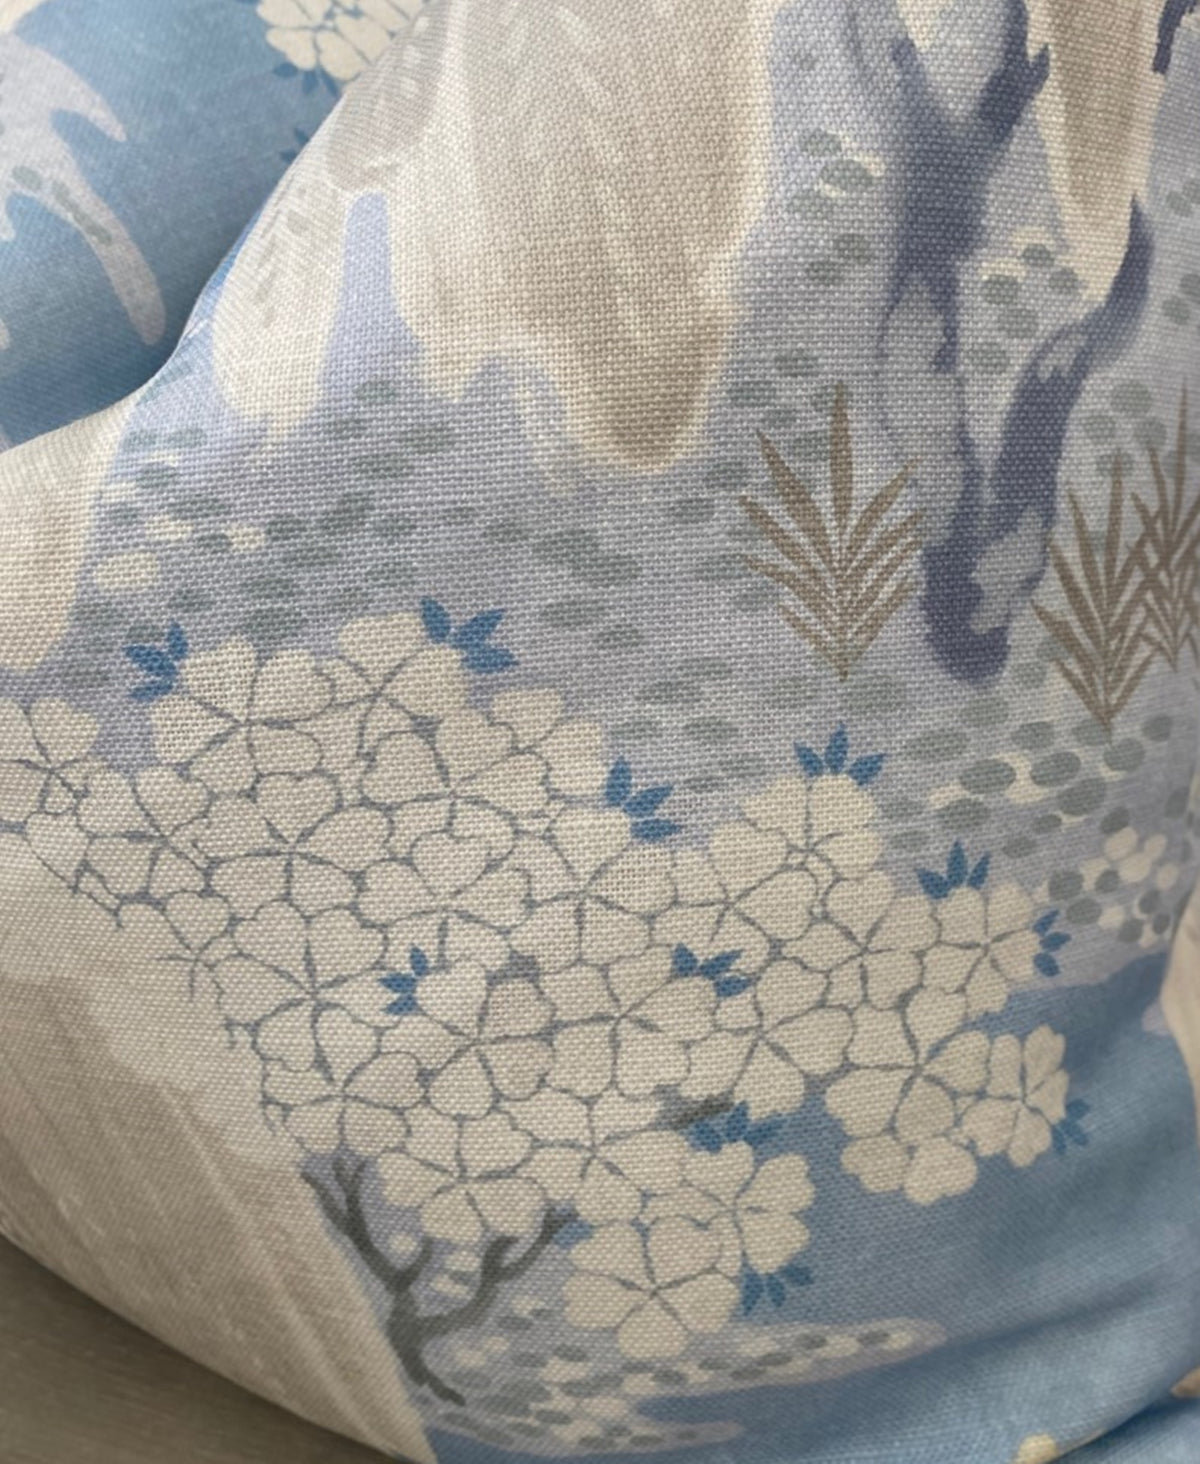 https://www.swancourtlimited.shop/wp-content/uploads/1695/94/anna-french-willow-tree-pillow-cover-soft-blue-swan-court_4.jpg